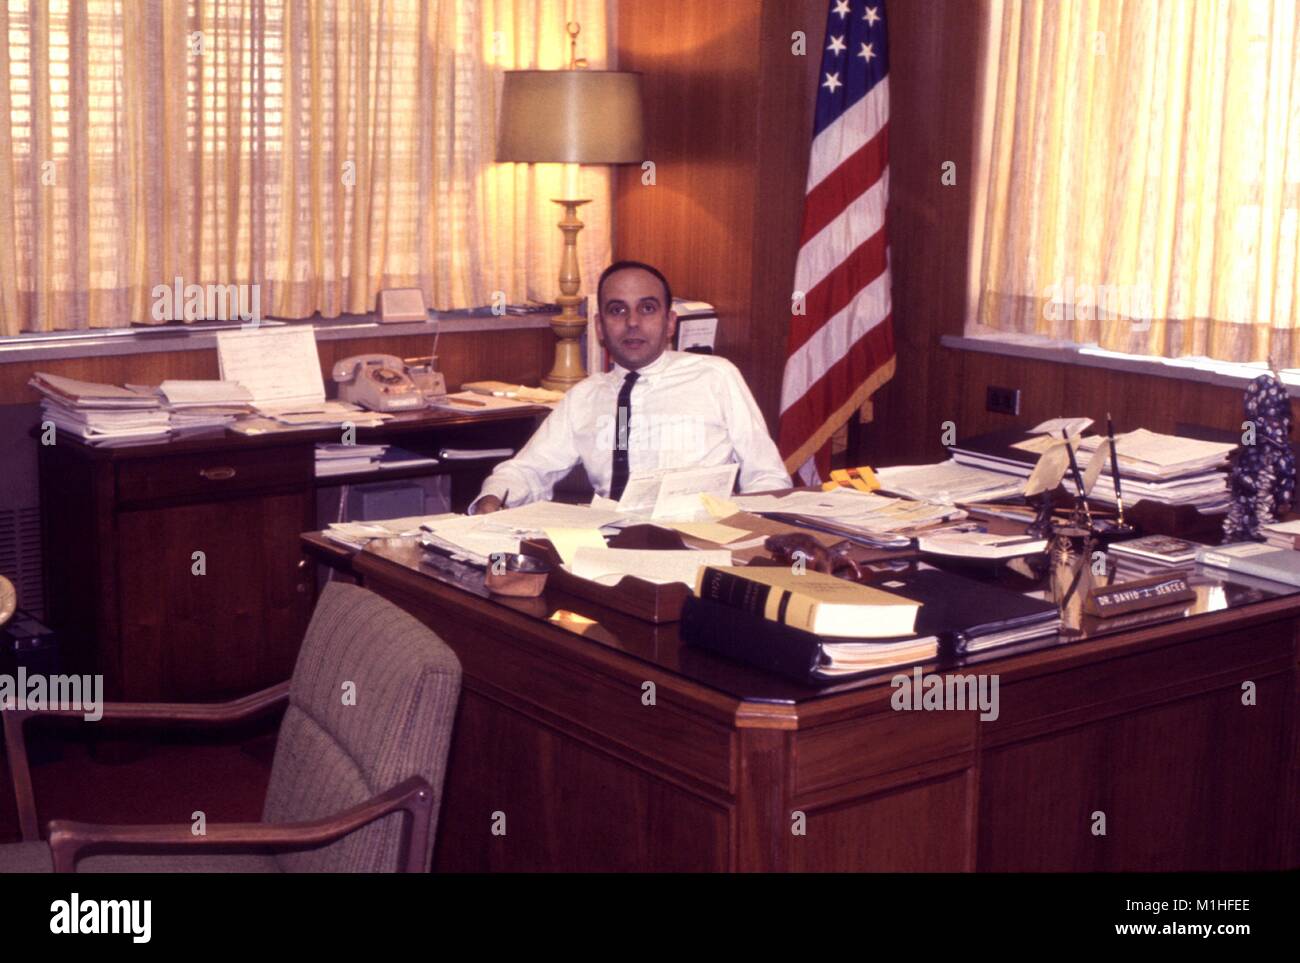 Photograph of Dr. David Sencer, CDC (Centers for Disease Control) director (1966-1977), sitting behind a desk covered with papers, an American flag visible behind him, 1970. Image courtesy CDC. () Stock Photo